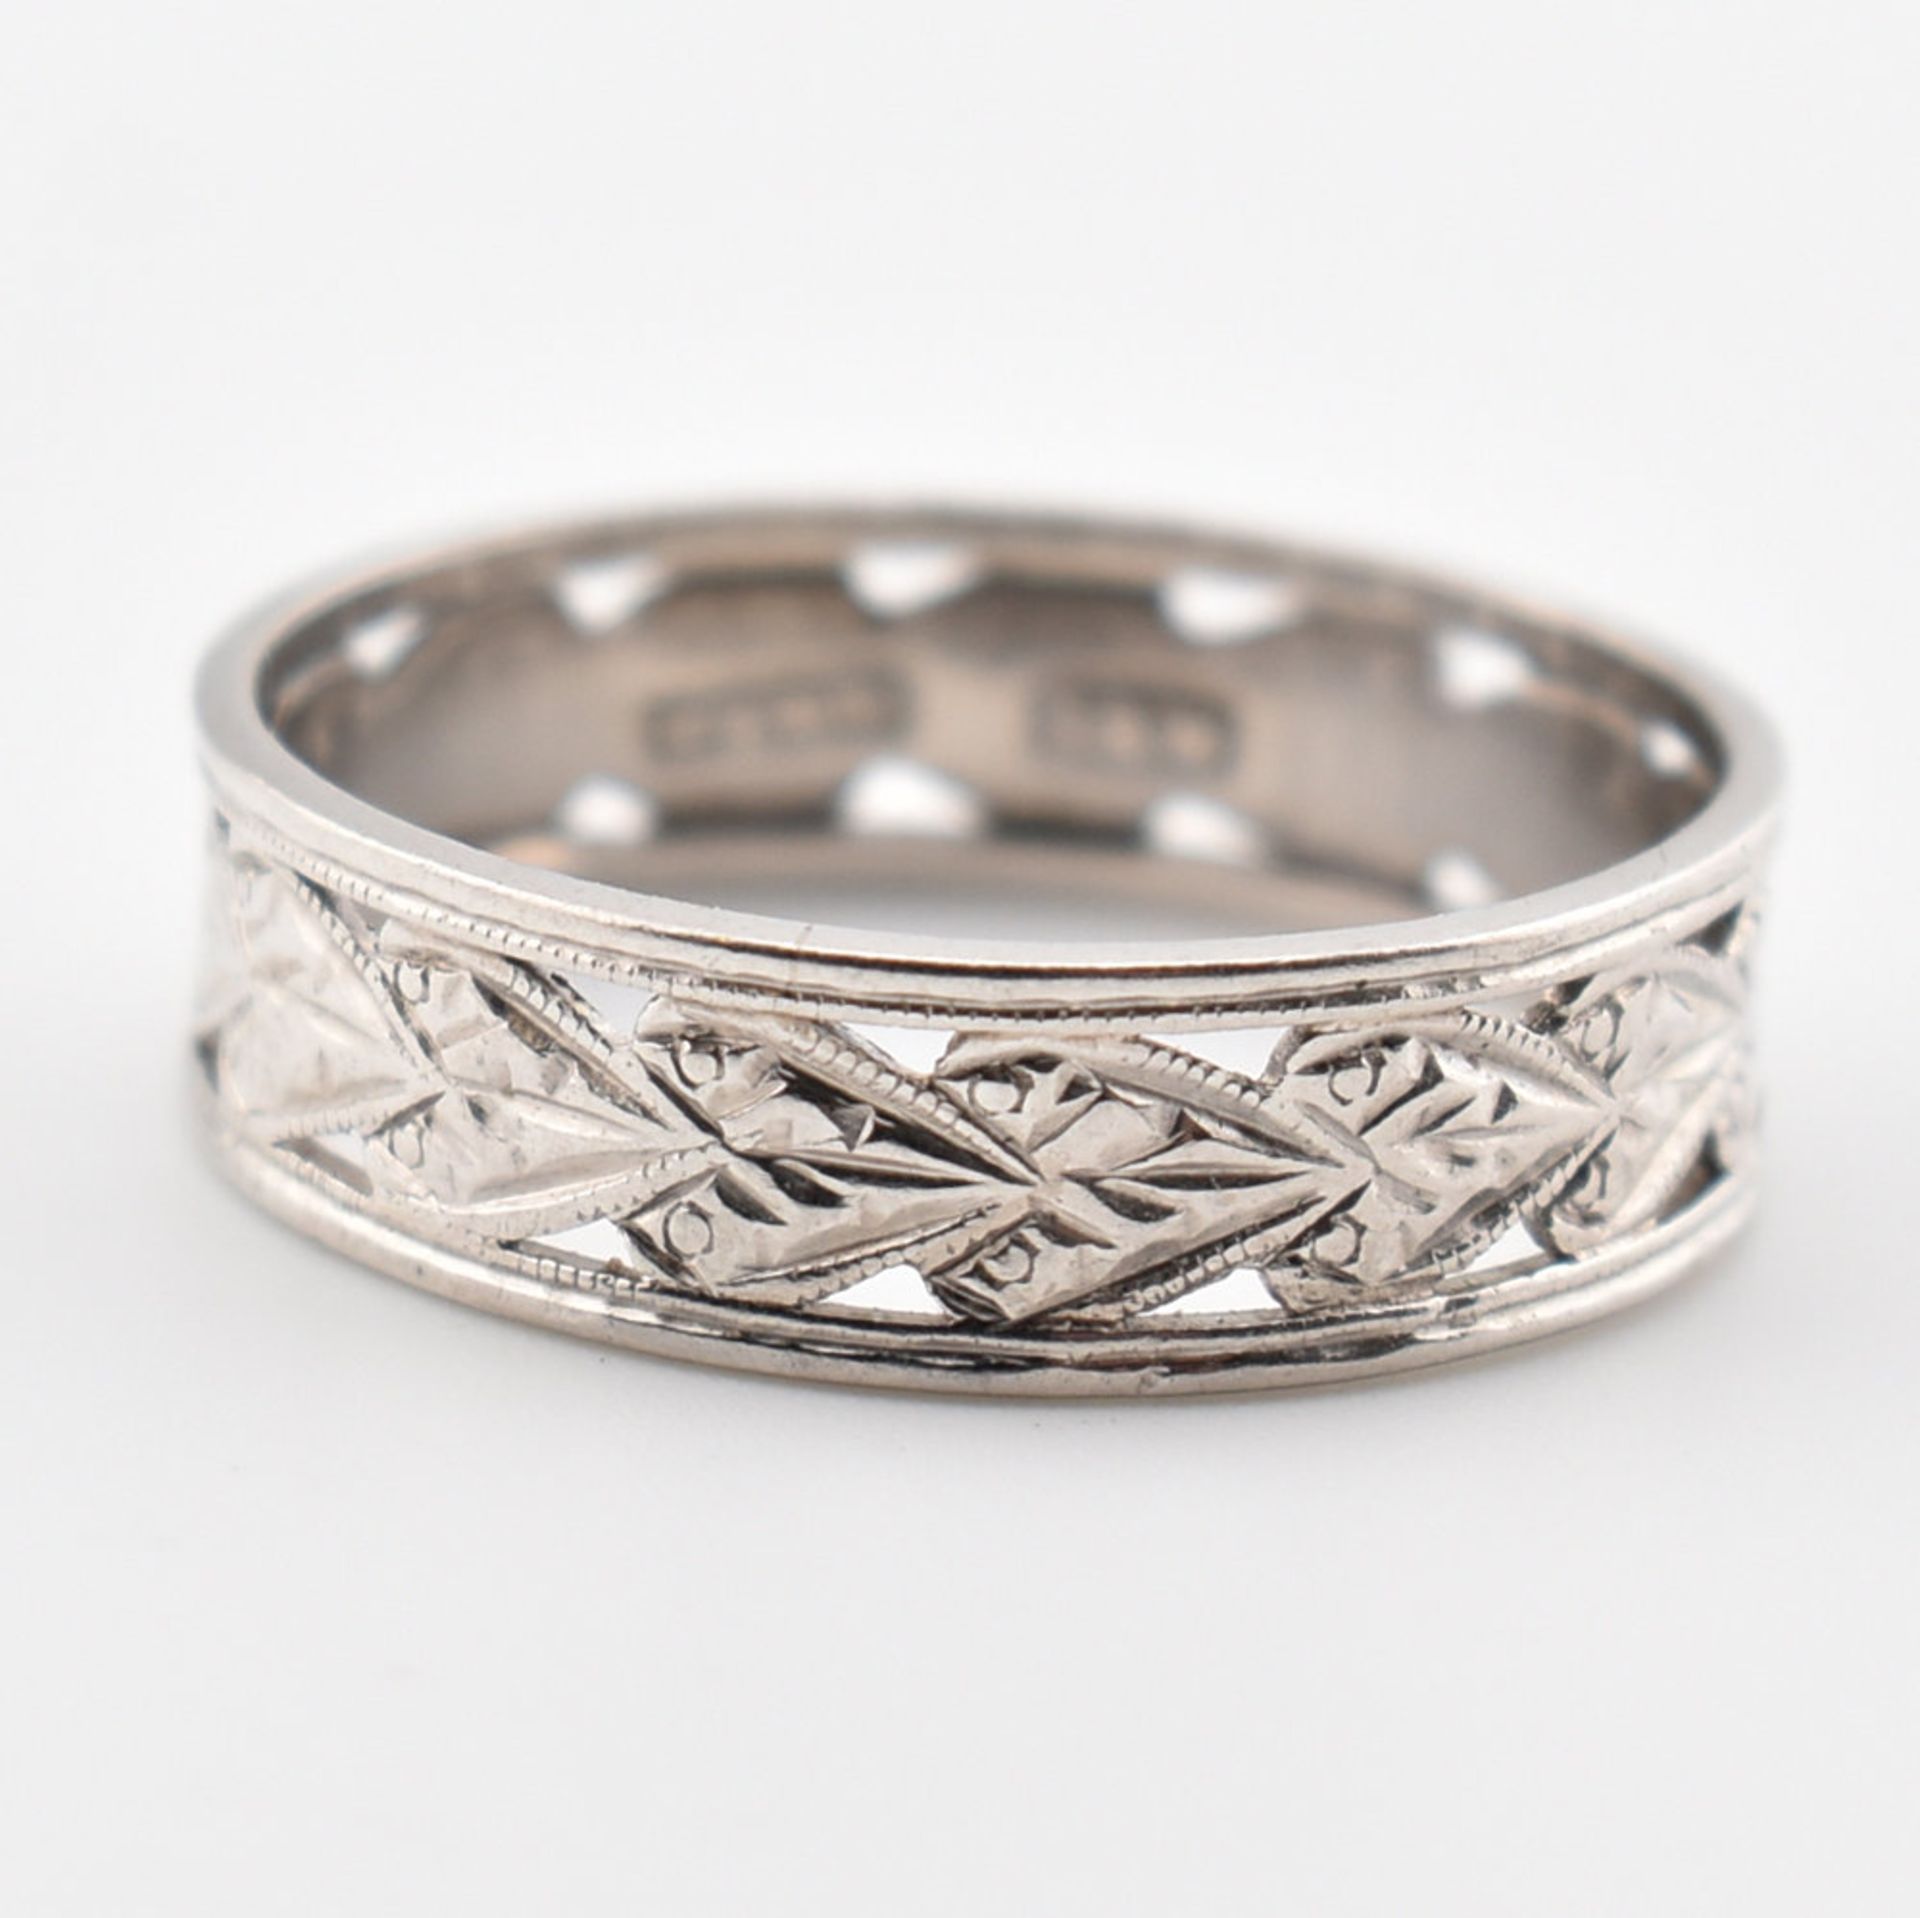 EARLY 20TH CENTURY OPENWORK HEART BAND RING - Image 5 of 7